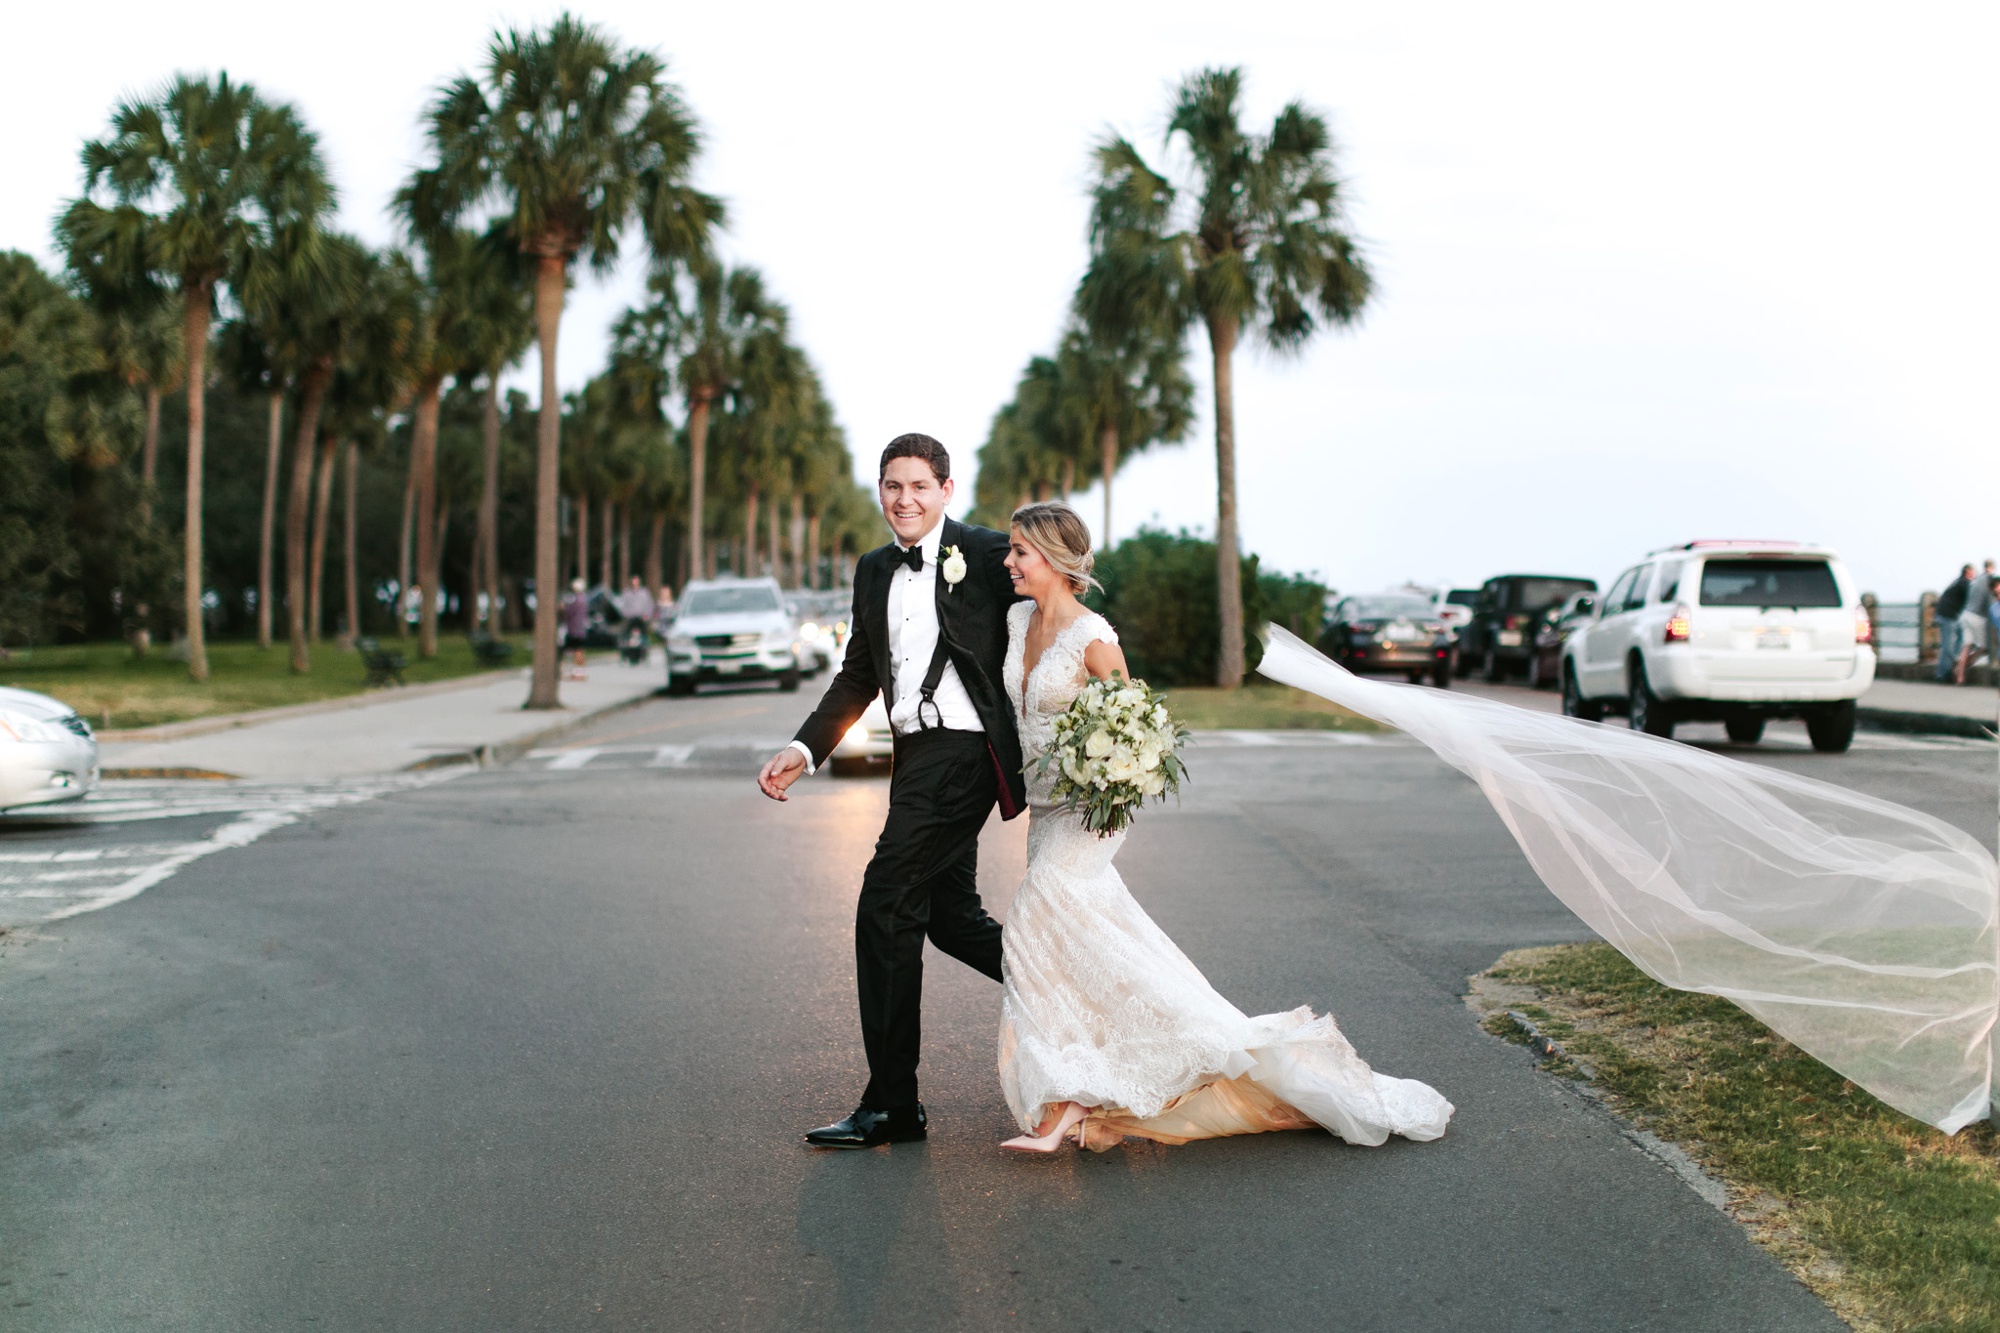 A joyful bride and groom cross the street unaware of the bride's veil flying in the wind. Moment captured by destination wedding photographer Rebecca Cerasani